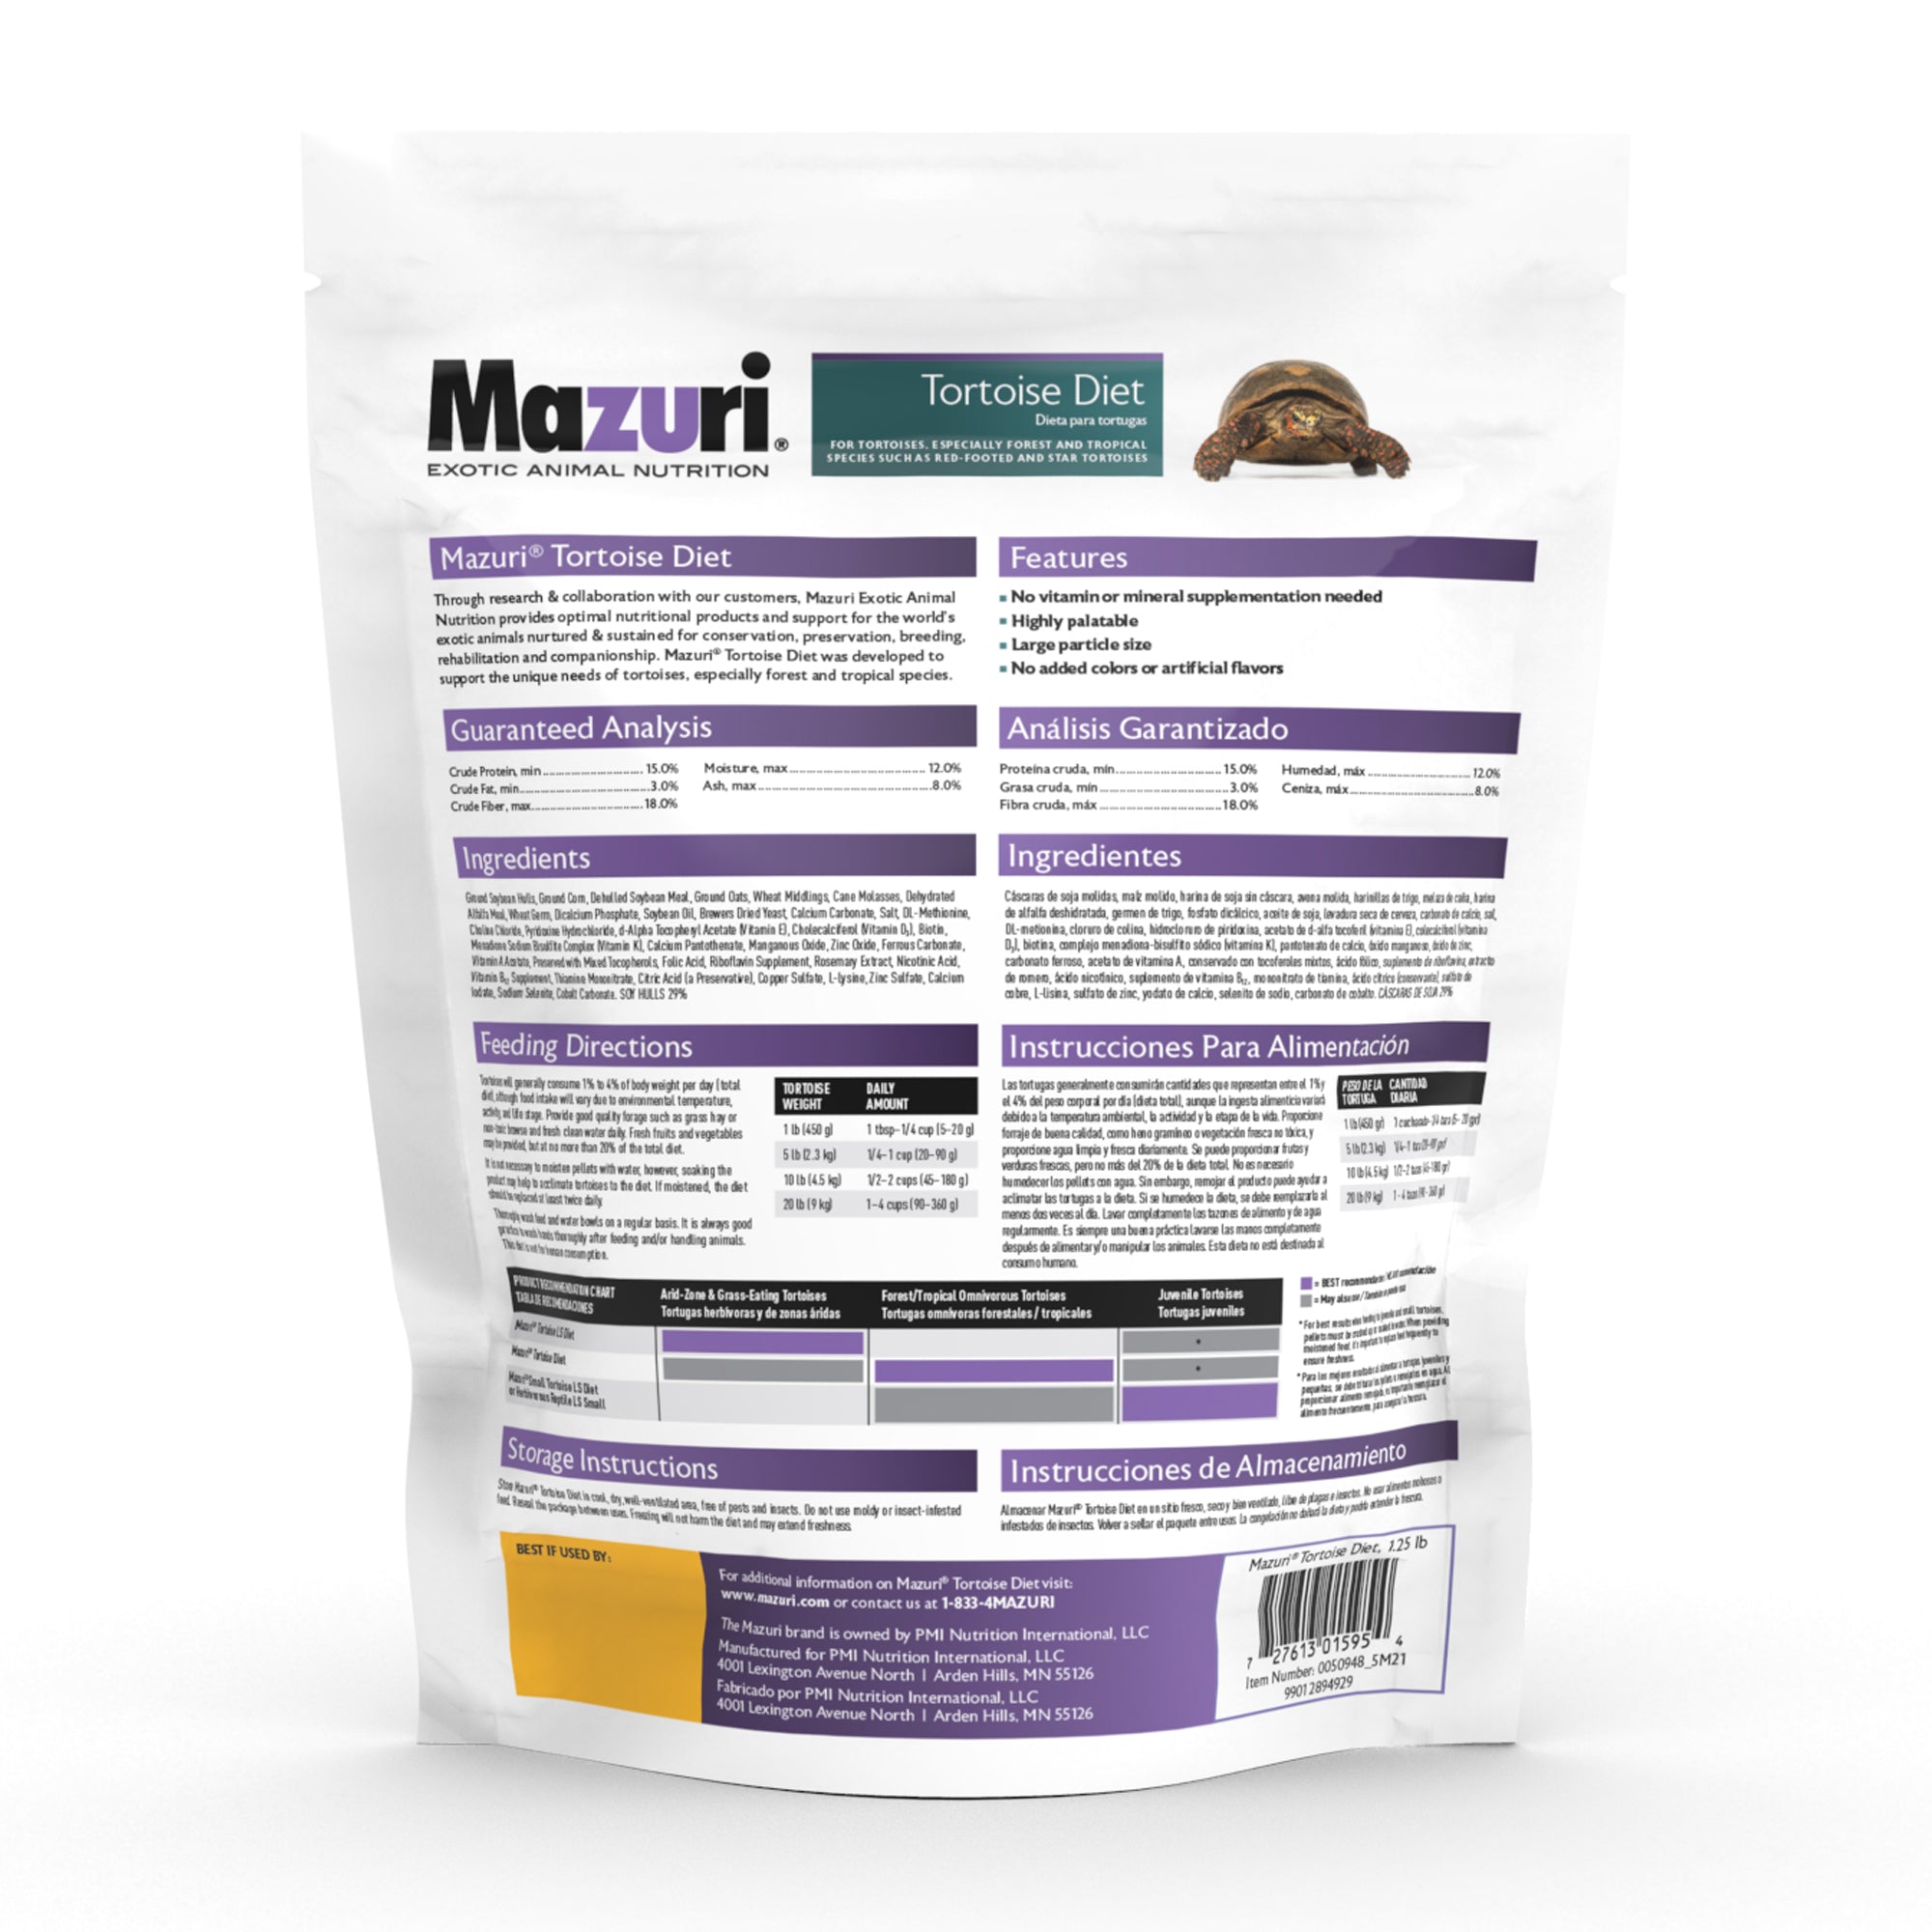 Mazuri Tortoise Diet back of bag with features, guaranteed analysis, ingredients and feeding directions.